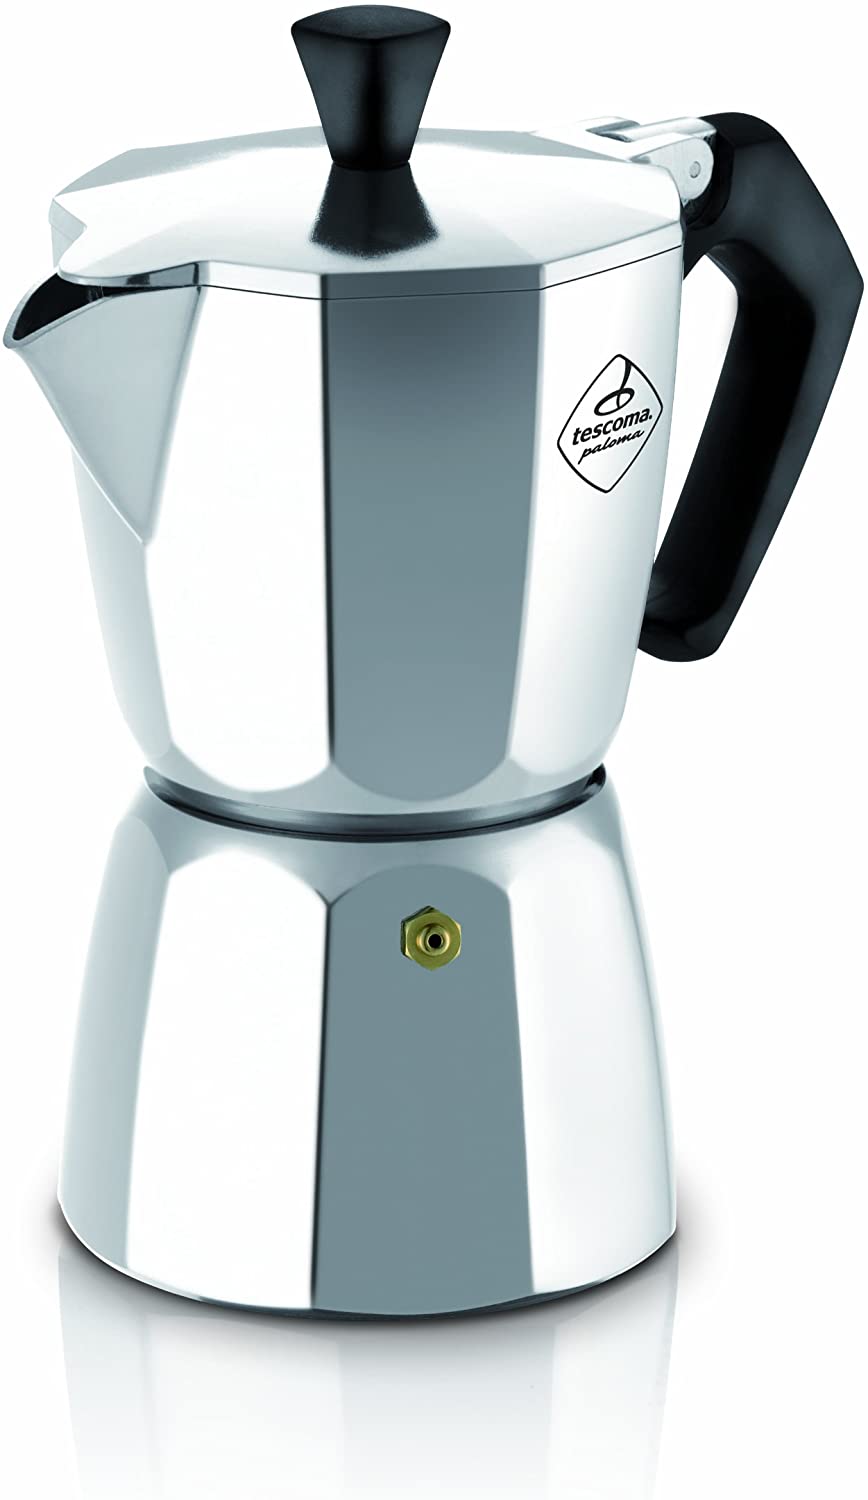 Tescoma Paloma Coffee Maker for 9 Cups